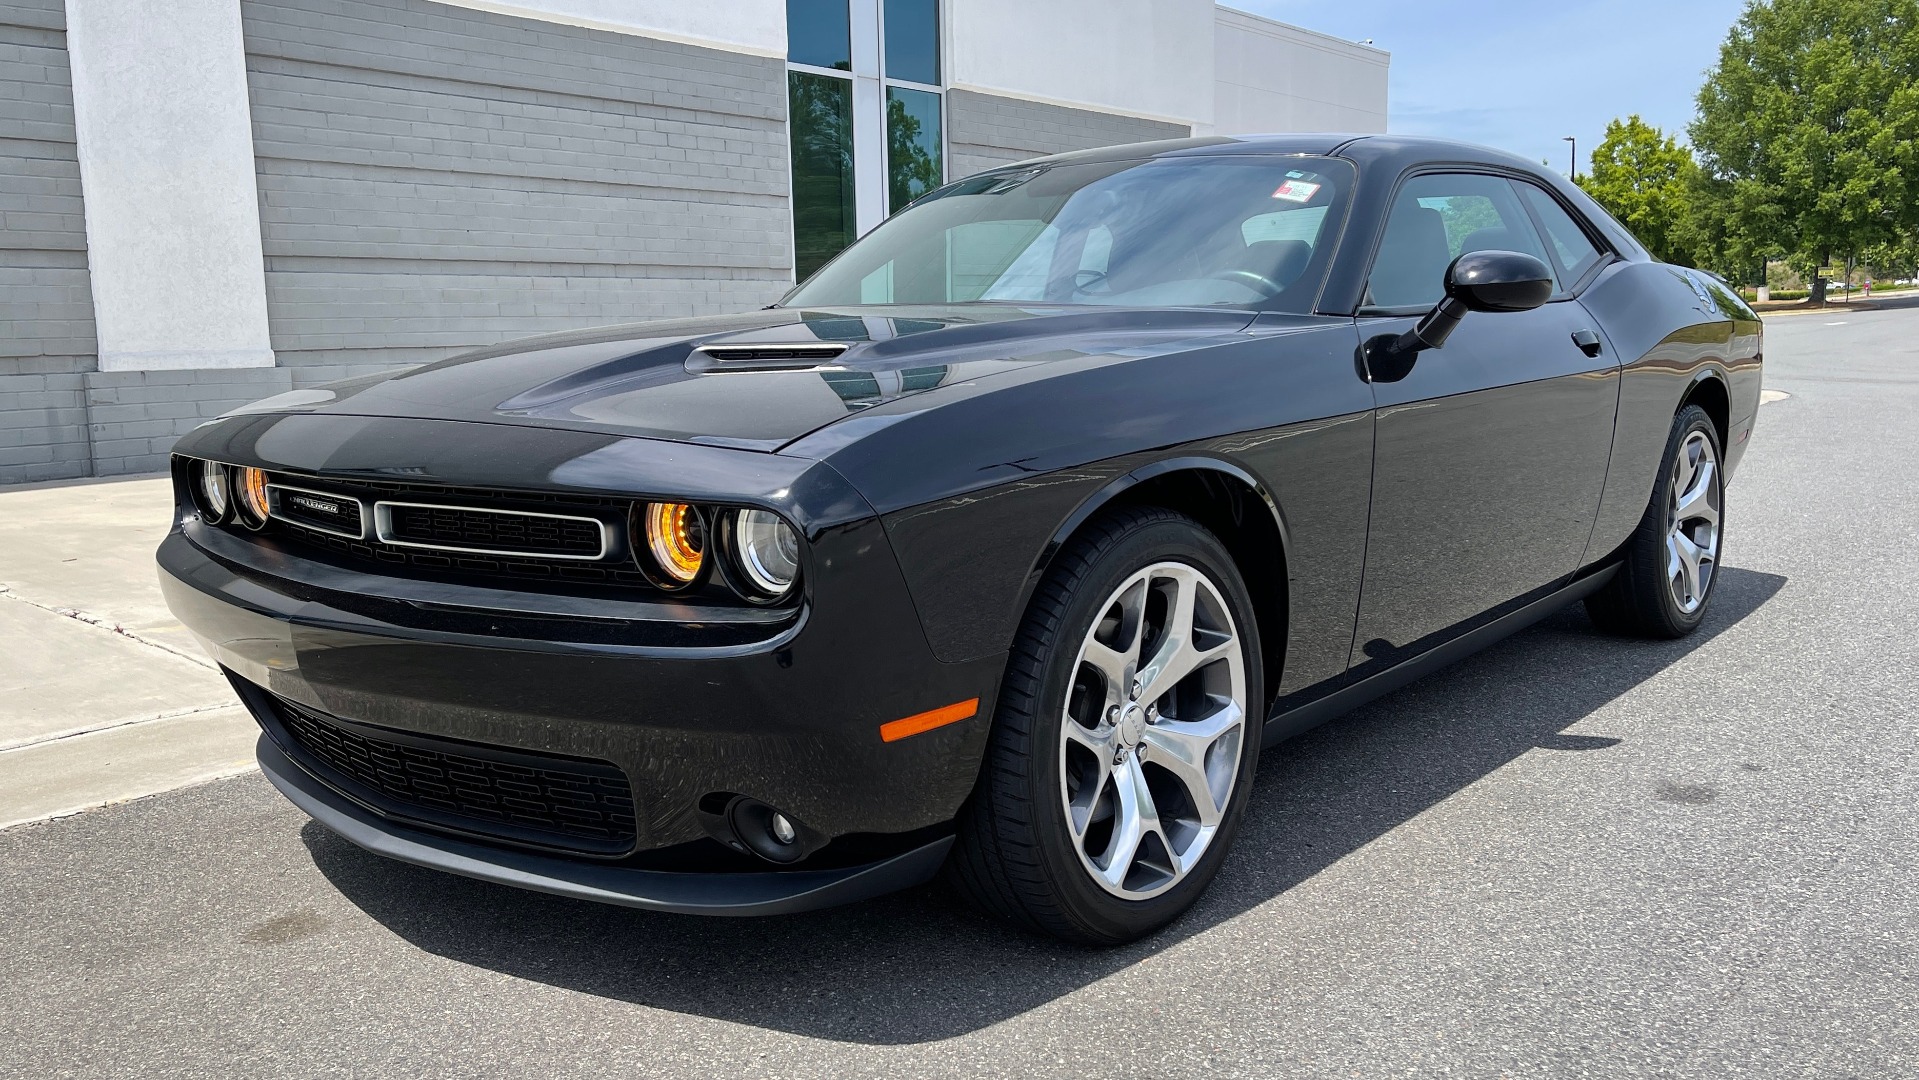 Used 2015 Dodge CHALLENGER SXT PLUS COUPE / 3.6L V6 / 8-SPD AUTO / NAV / ALPINE / SUNROOF / REARVIEW for sale Sold at Formula Imports in Charlotte NC 28227 4